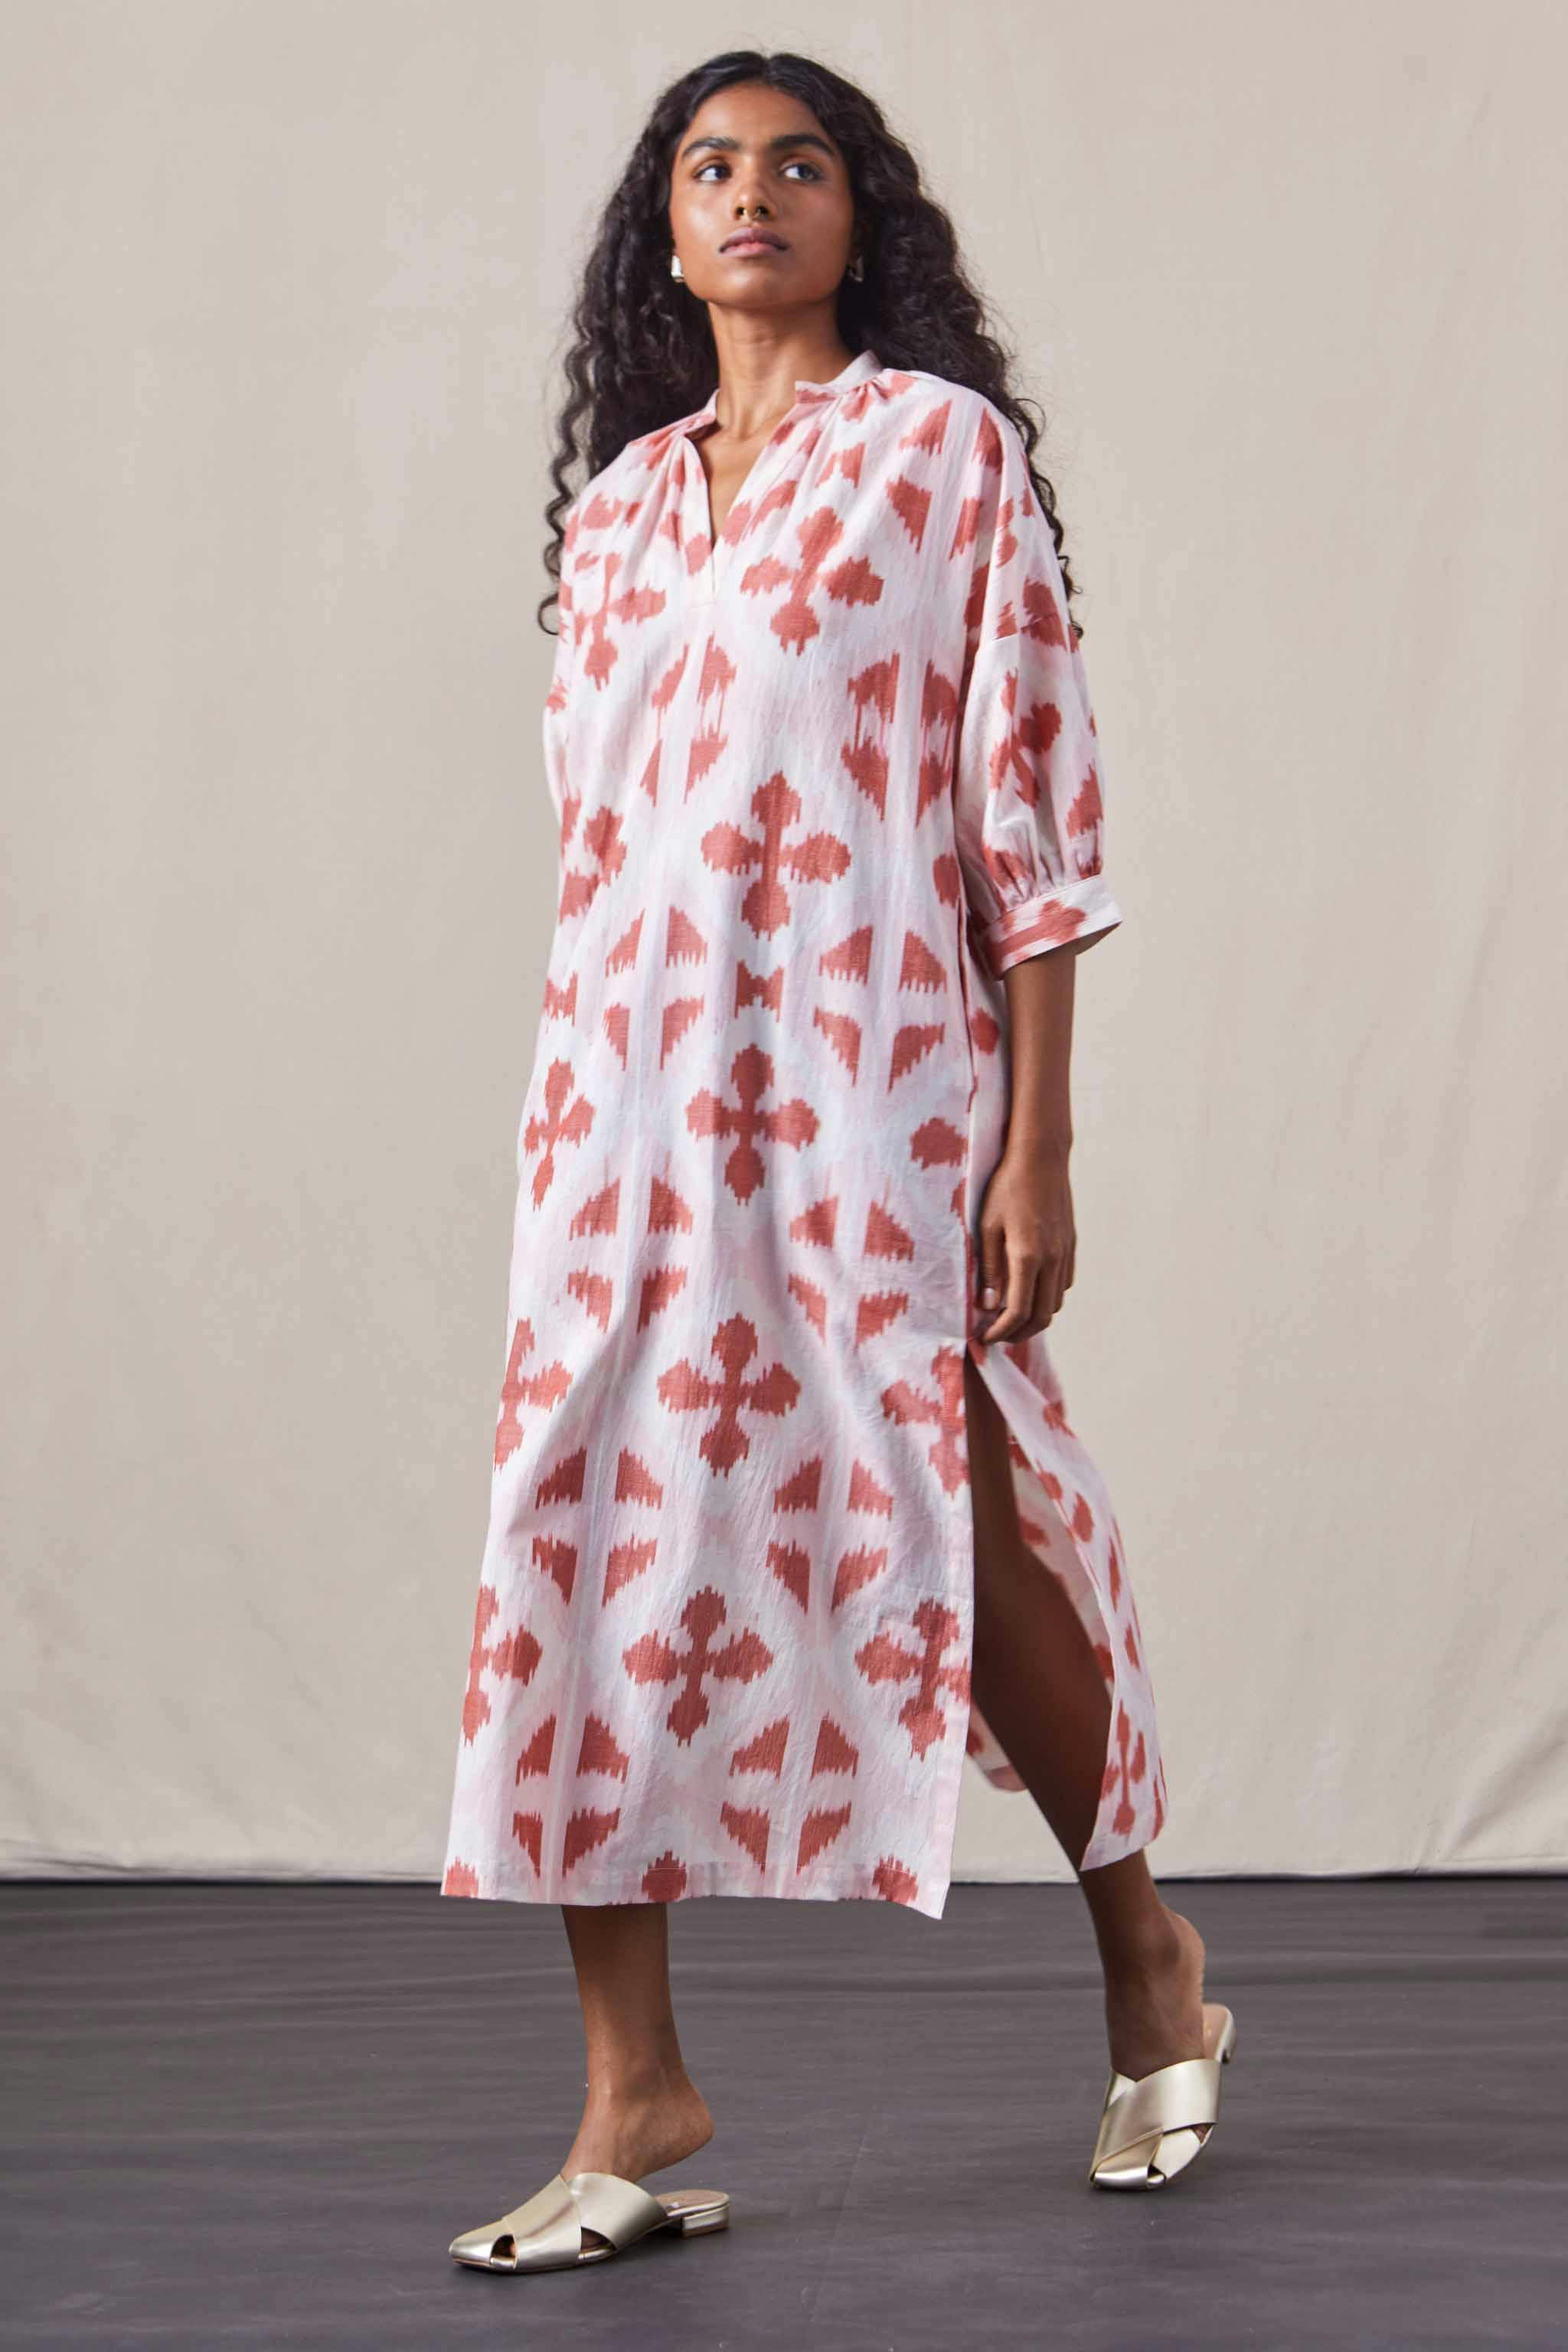 Cevvi - Ikat Dress Pink, a product by The Summer House